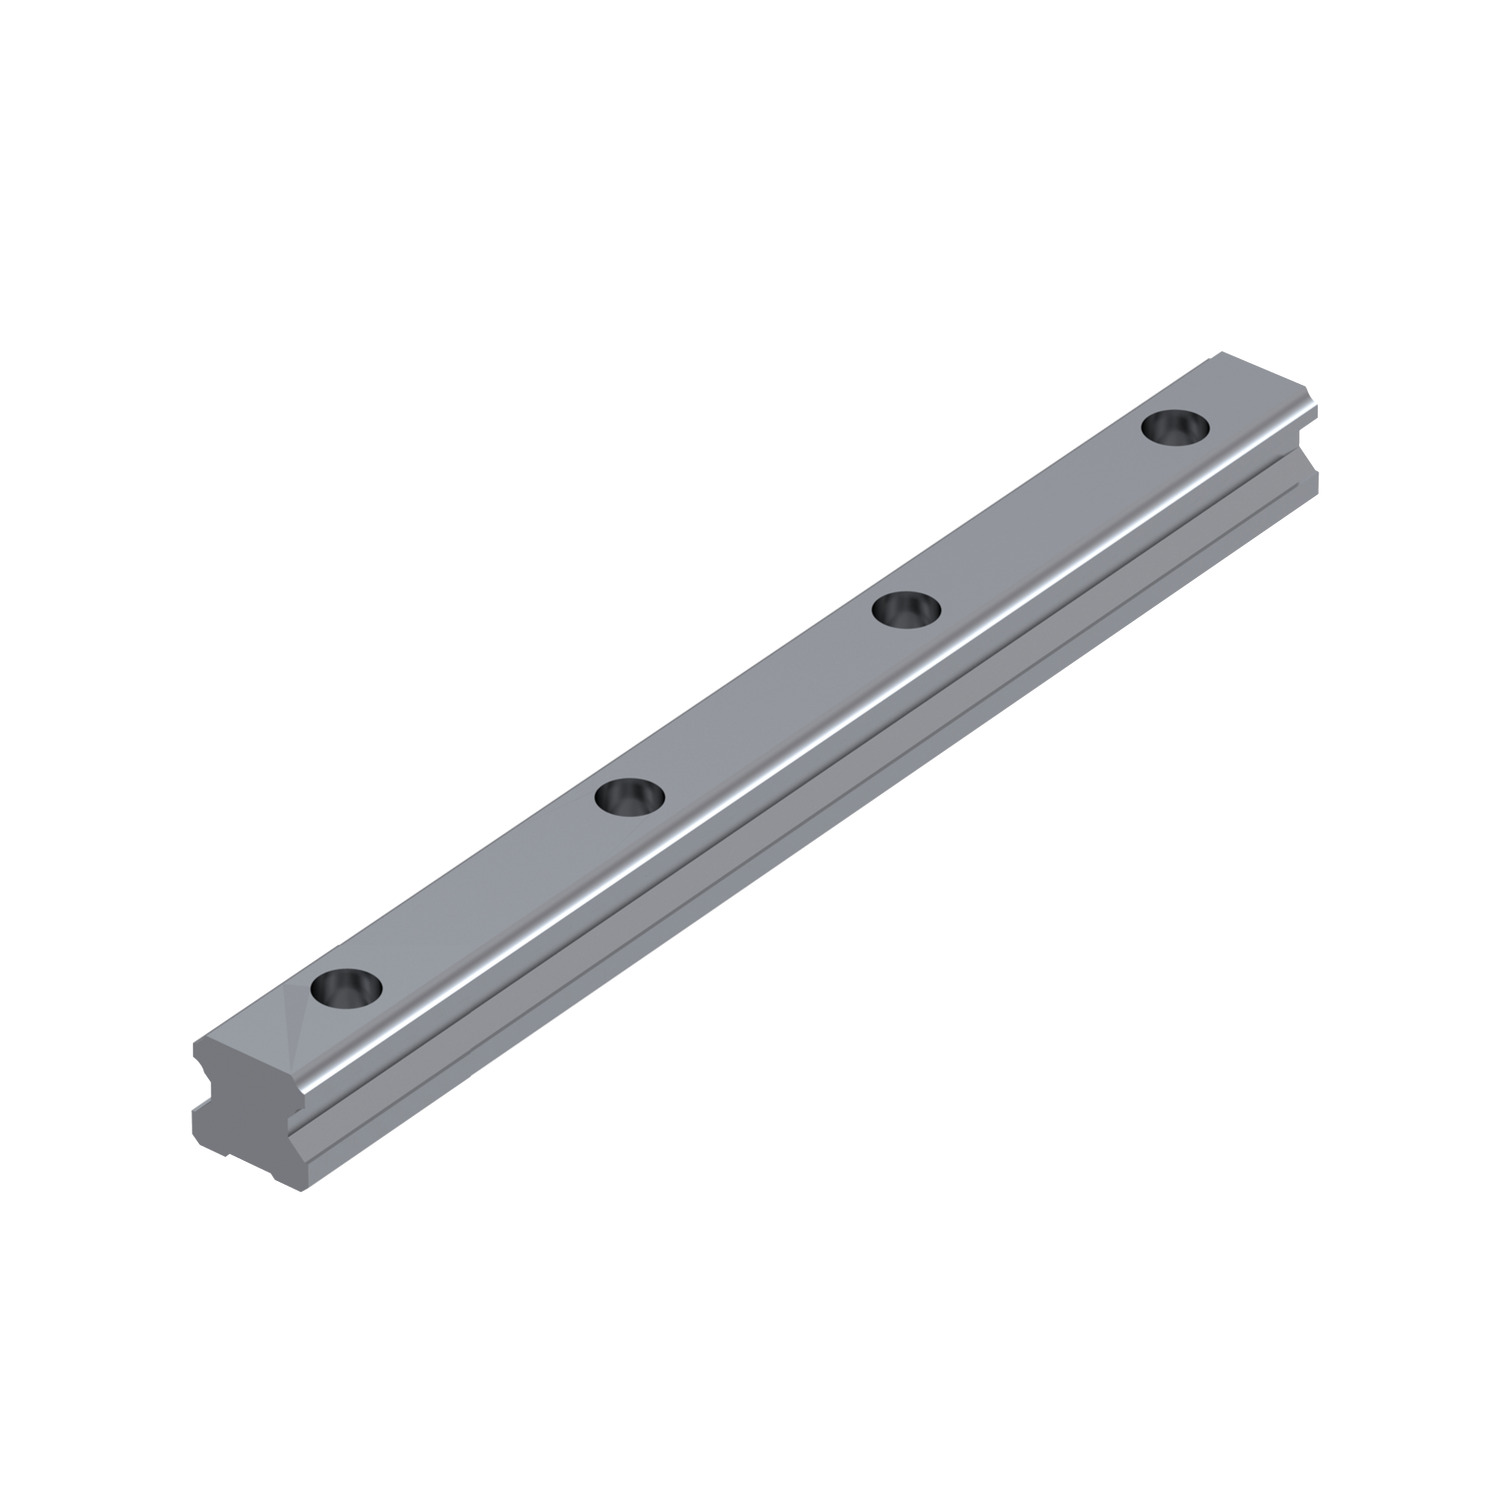 L1016.15-0940 Linear guide rail 15mm 940 Hardened and ground steel. EC:20162603 WG:05063055288743